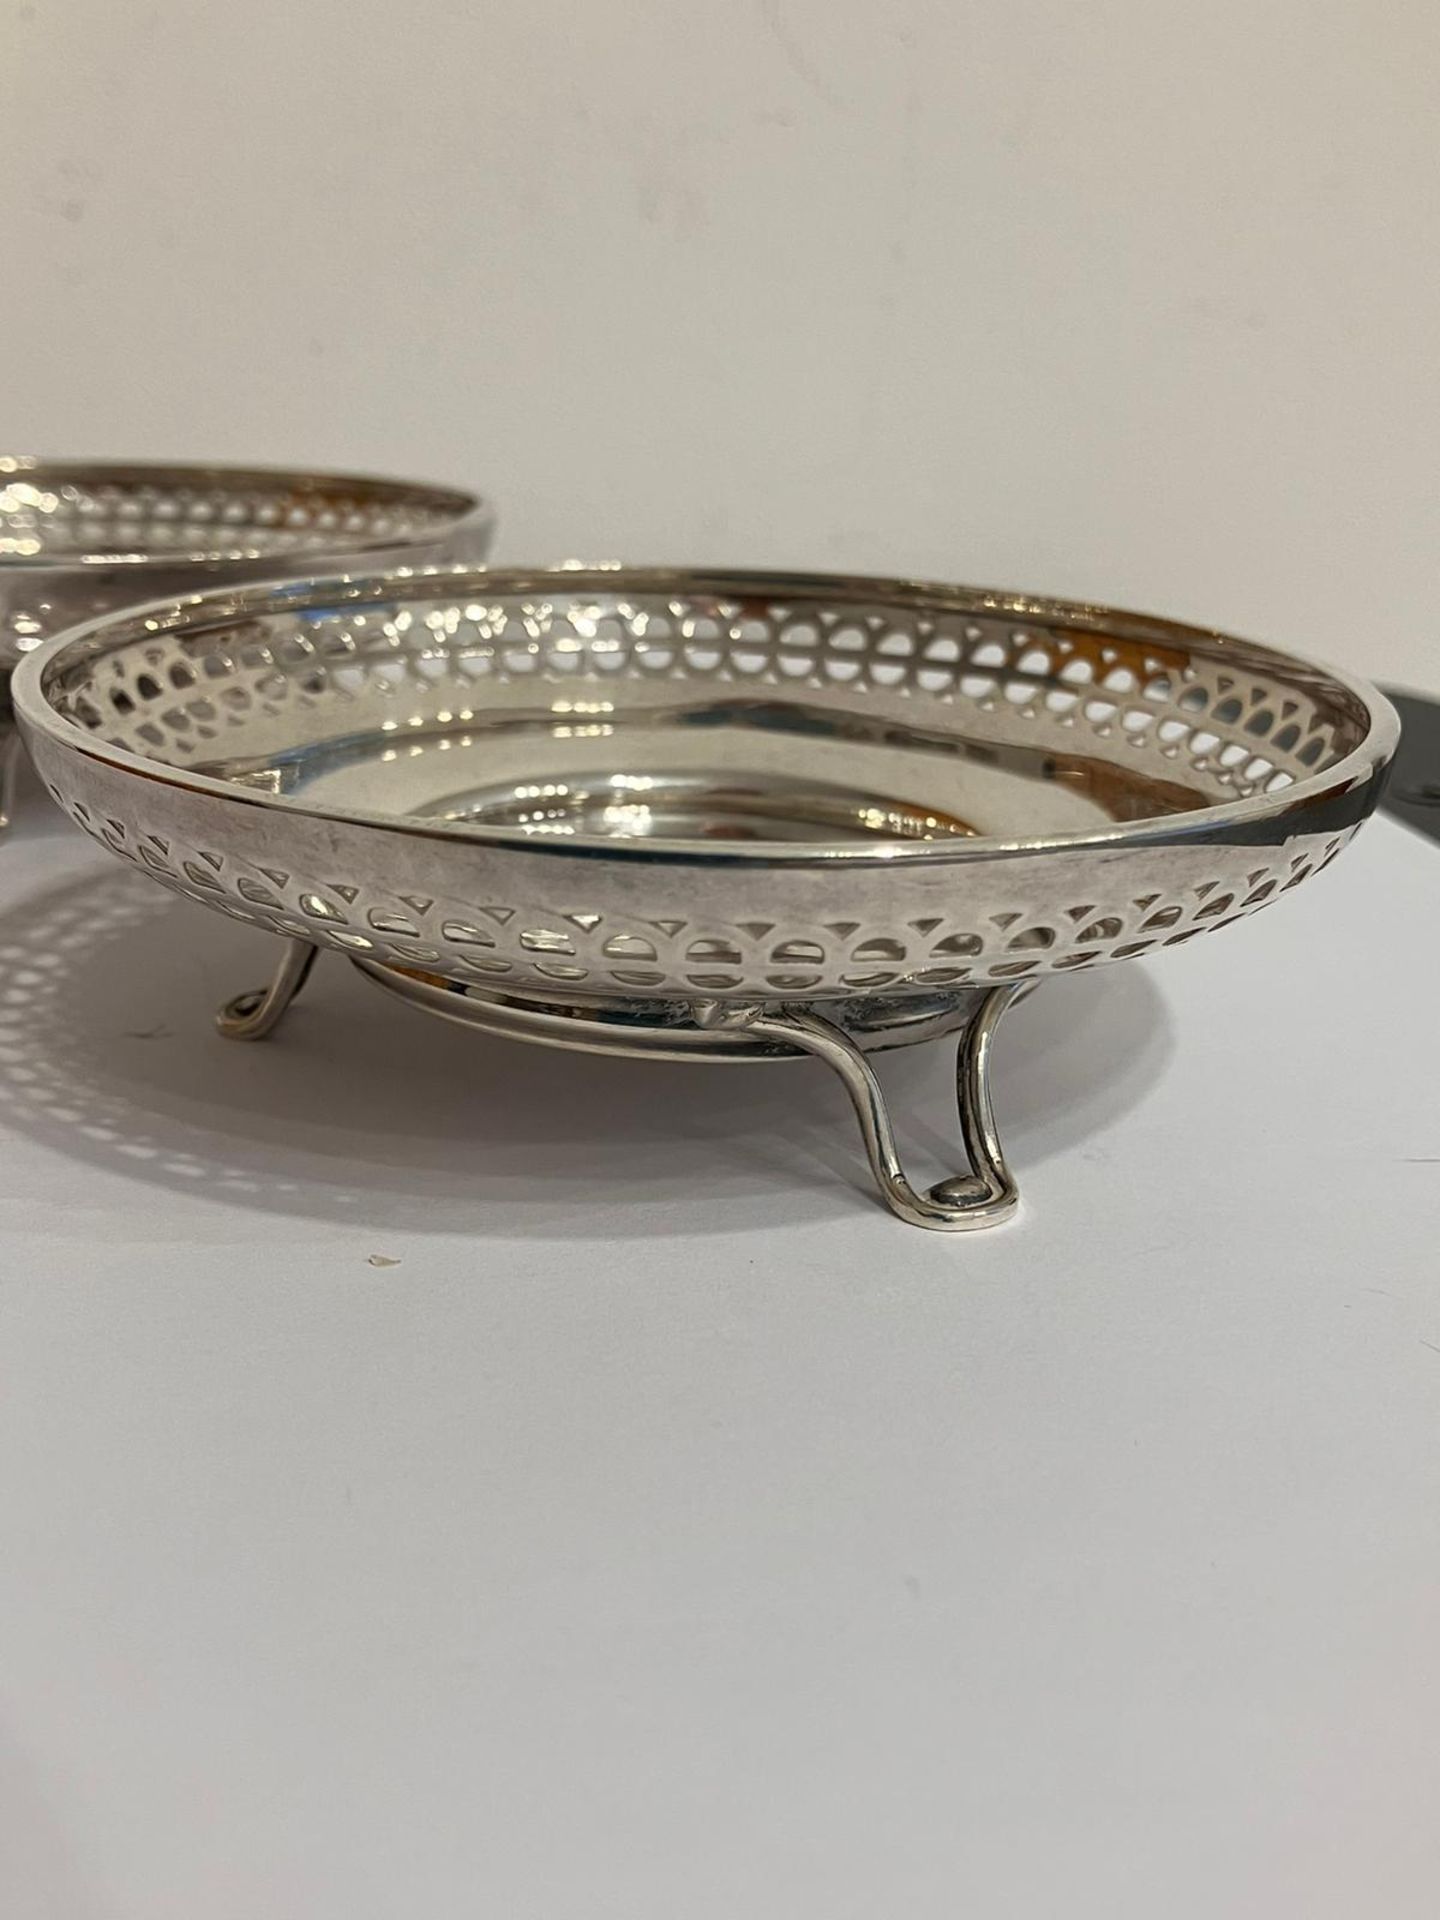 Antique SILVER Pair of BON BON DISHES. Hallmark for A and J Zimmerman, Birmingham 1925. Lovely art - Image 3 of 9